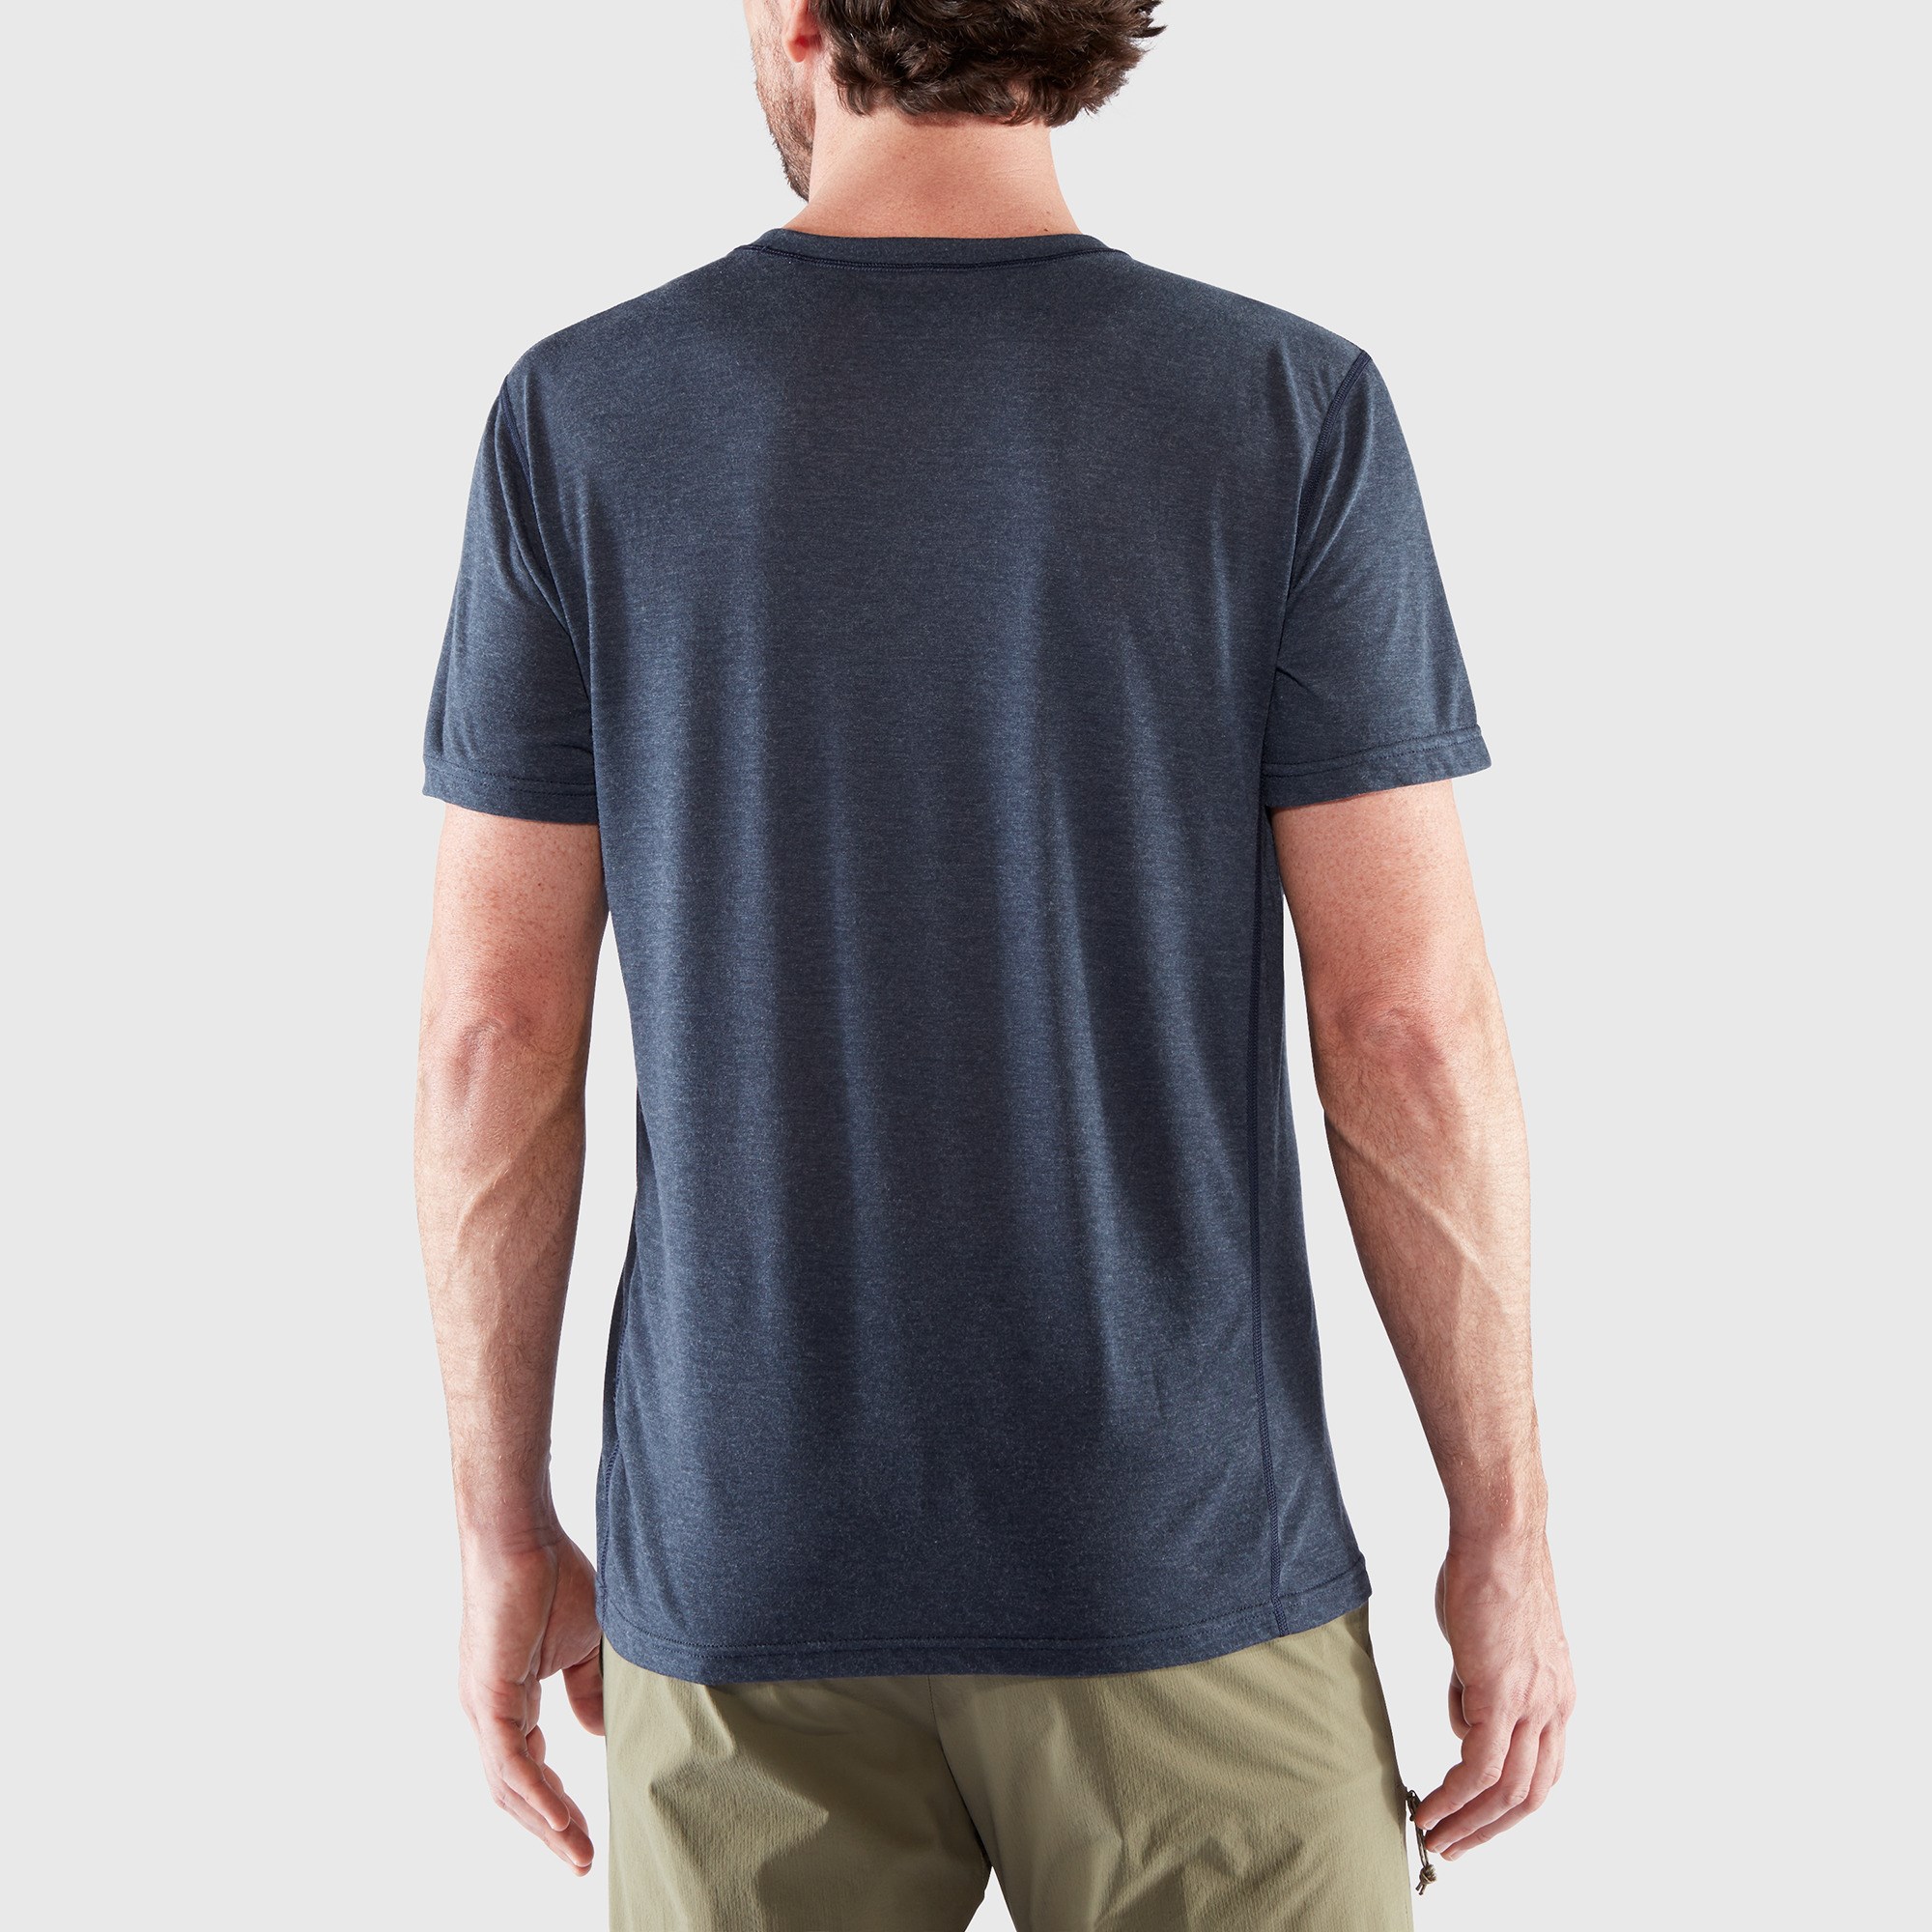 Details about   Fjallraven Men's High Coast Shirt Ss Various Sizes and Colors 